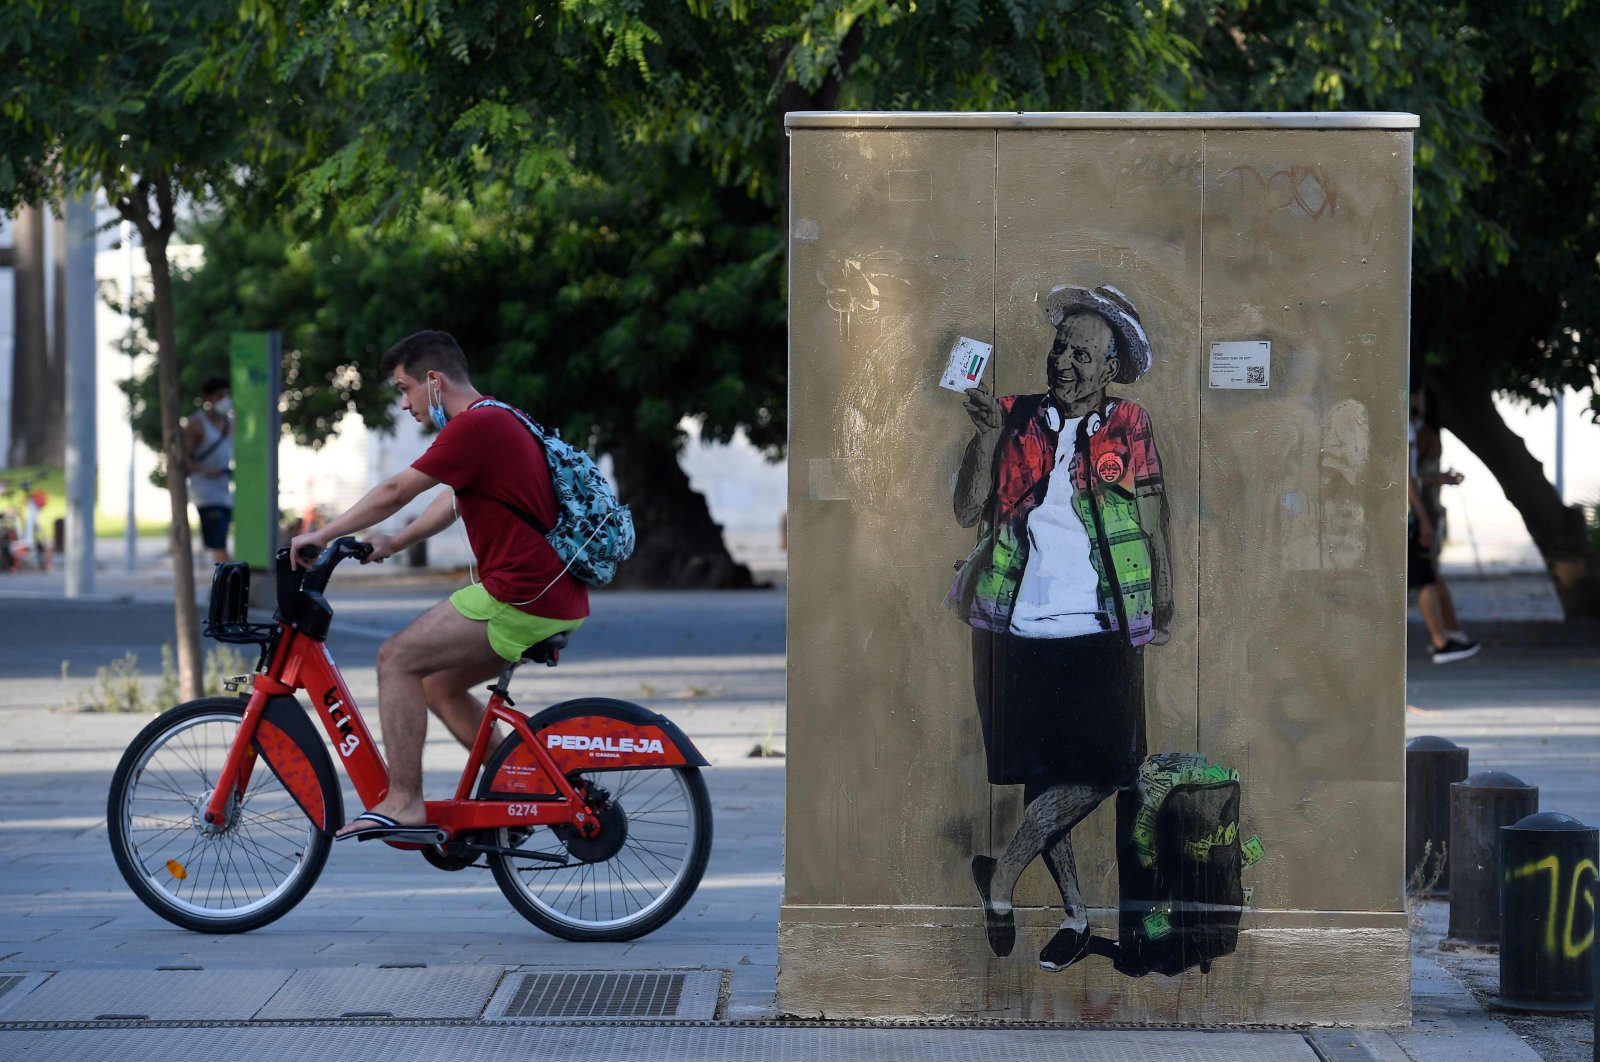 A man rides a bicycle past street art by TVBoy titled "Viajando como un Rey" (Travelling like a King) depicting former Spanish King Juan Carlos, in Barcelona, Spain, Aug. 20, 2020. (Photo by Josep Lago via AFP)